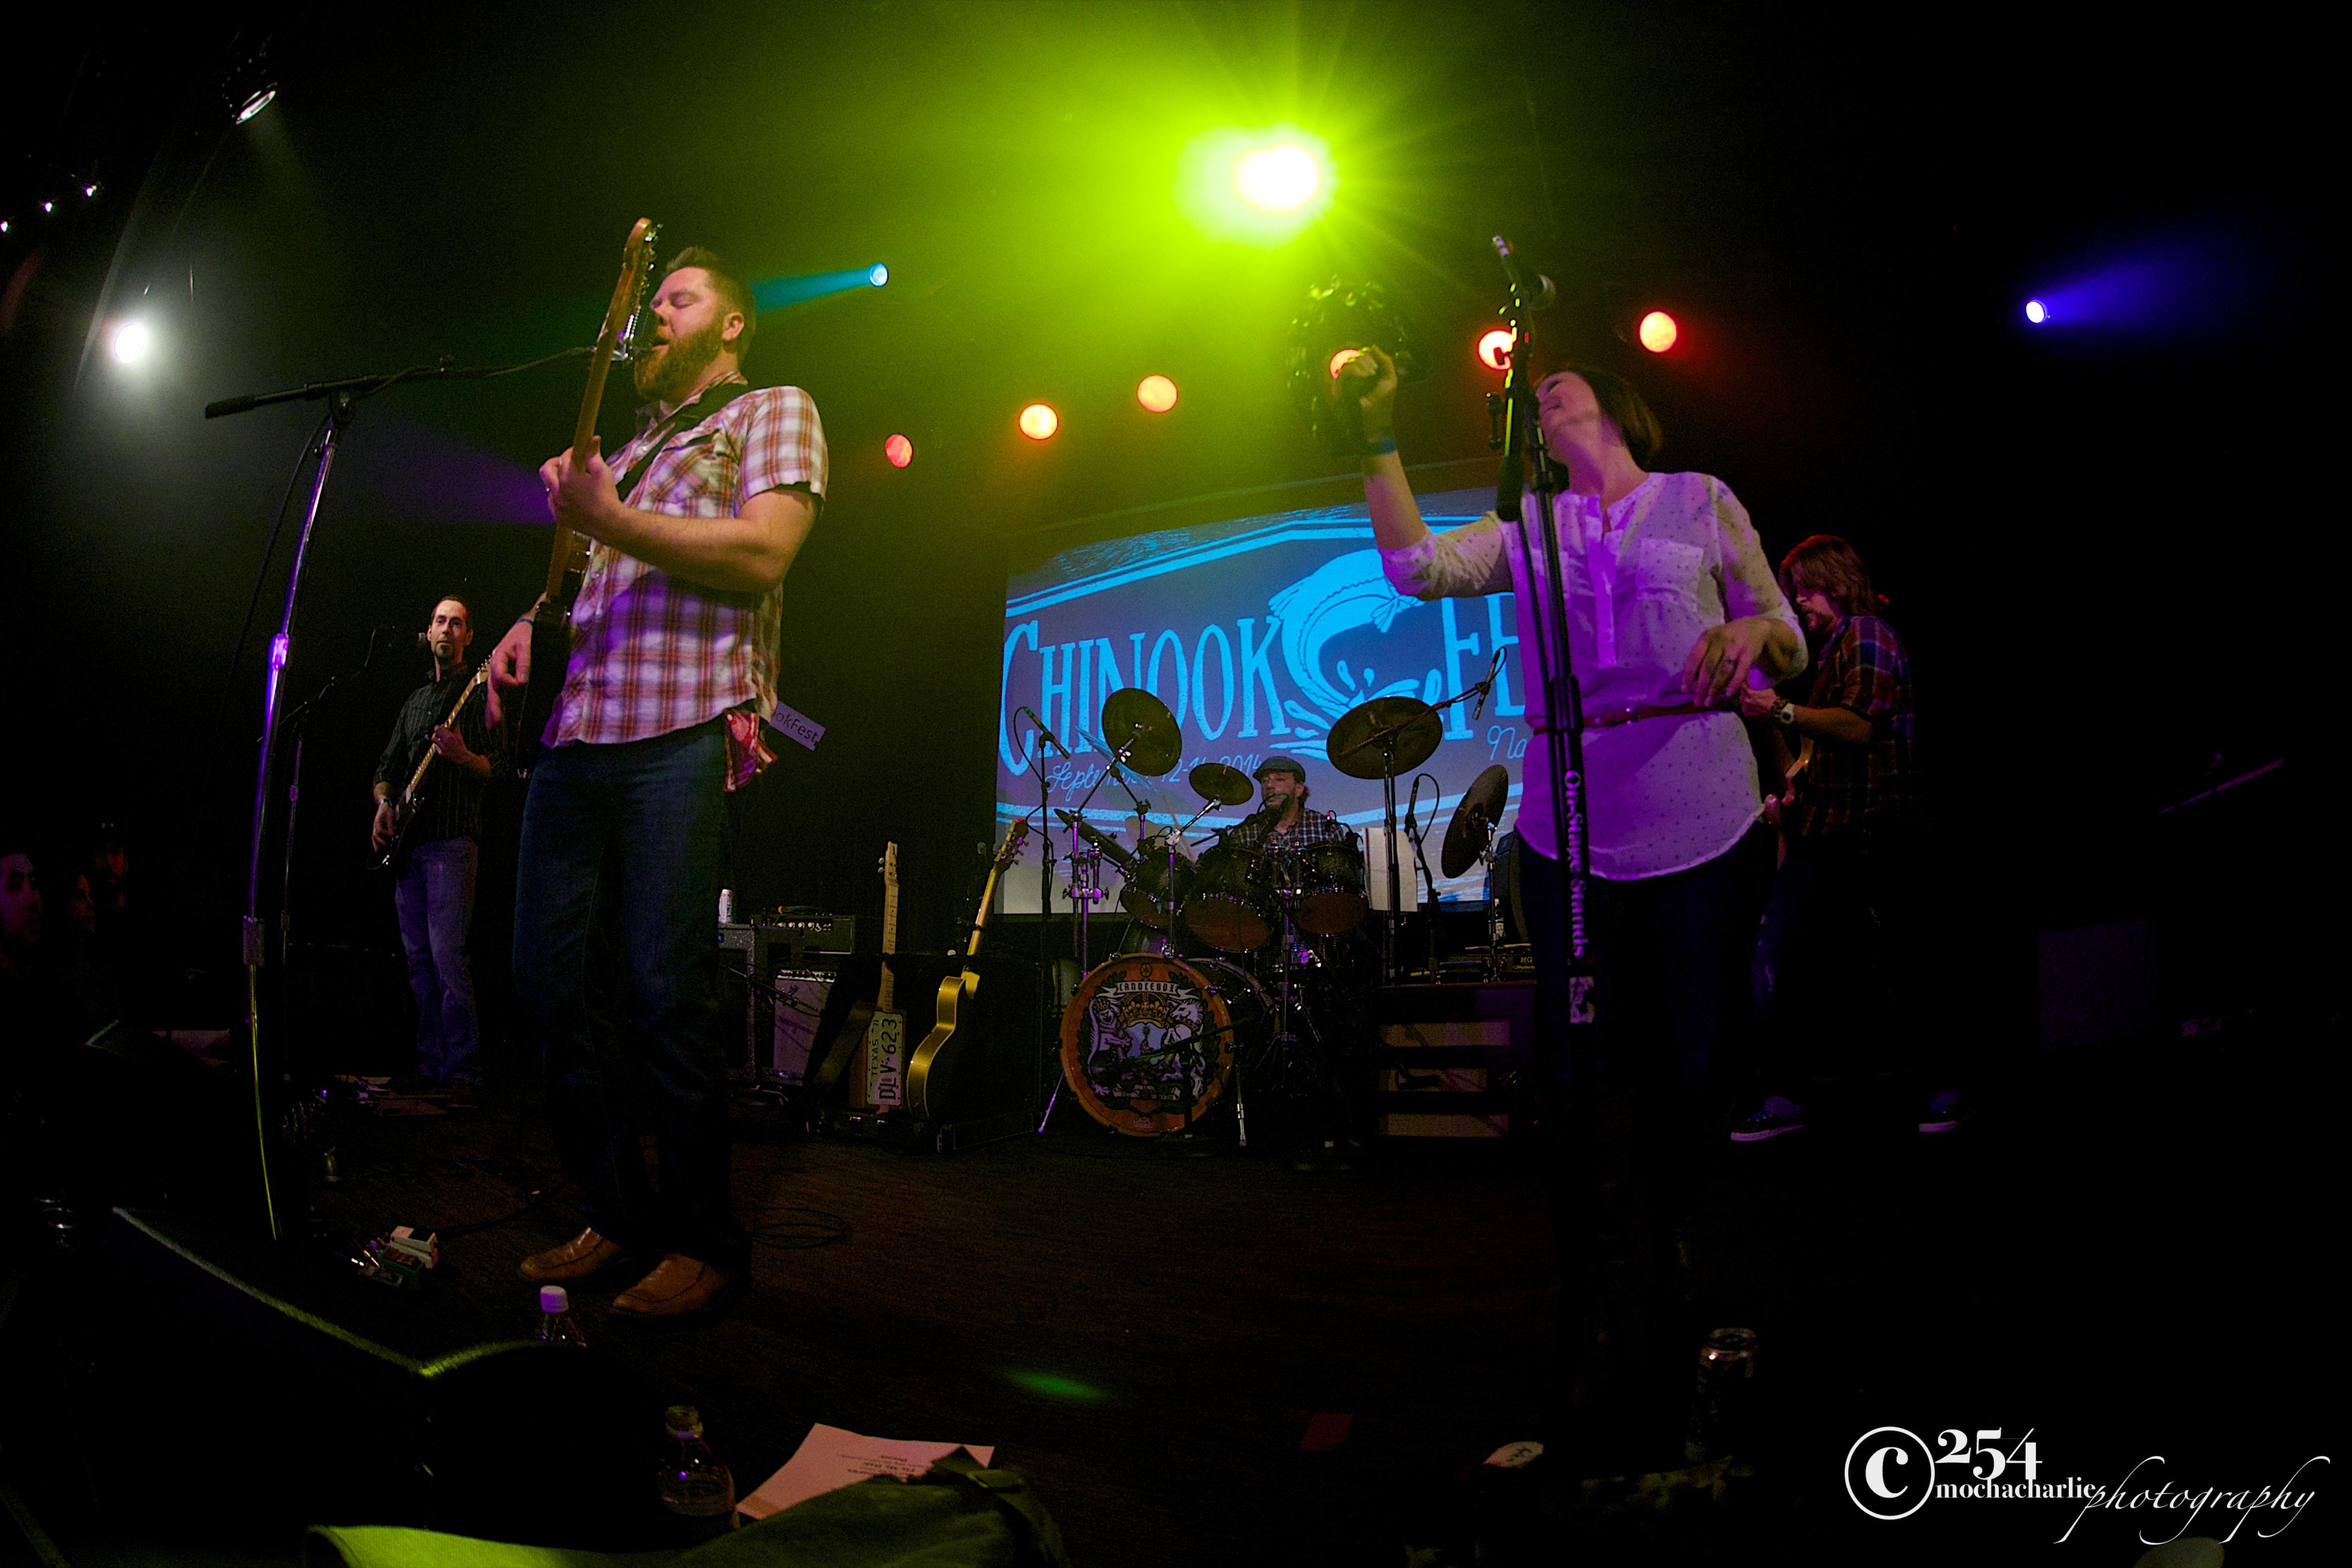 ChinookFest Announcement Show at The Crocodile (Photo by Mocha Charlie)